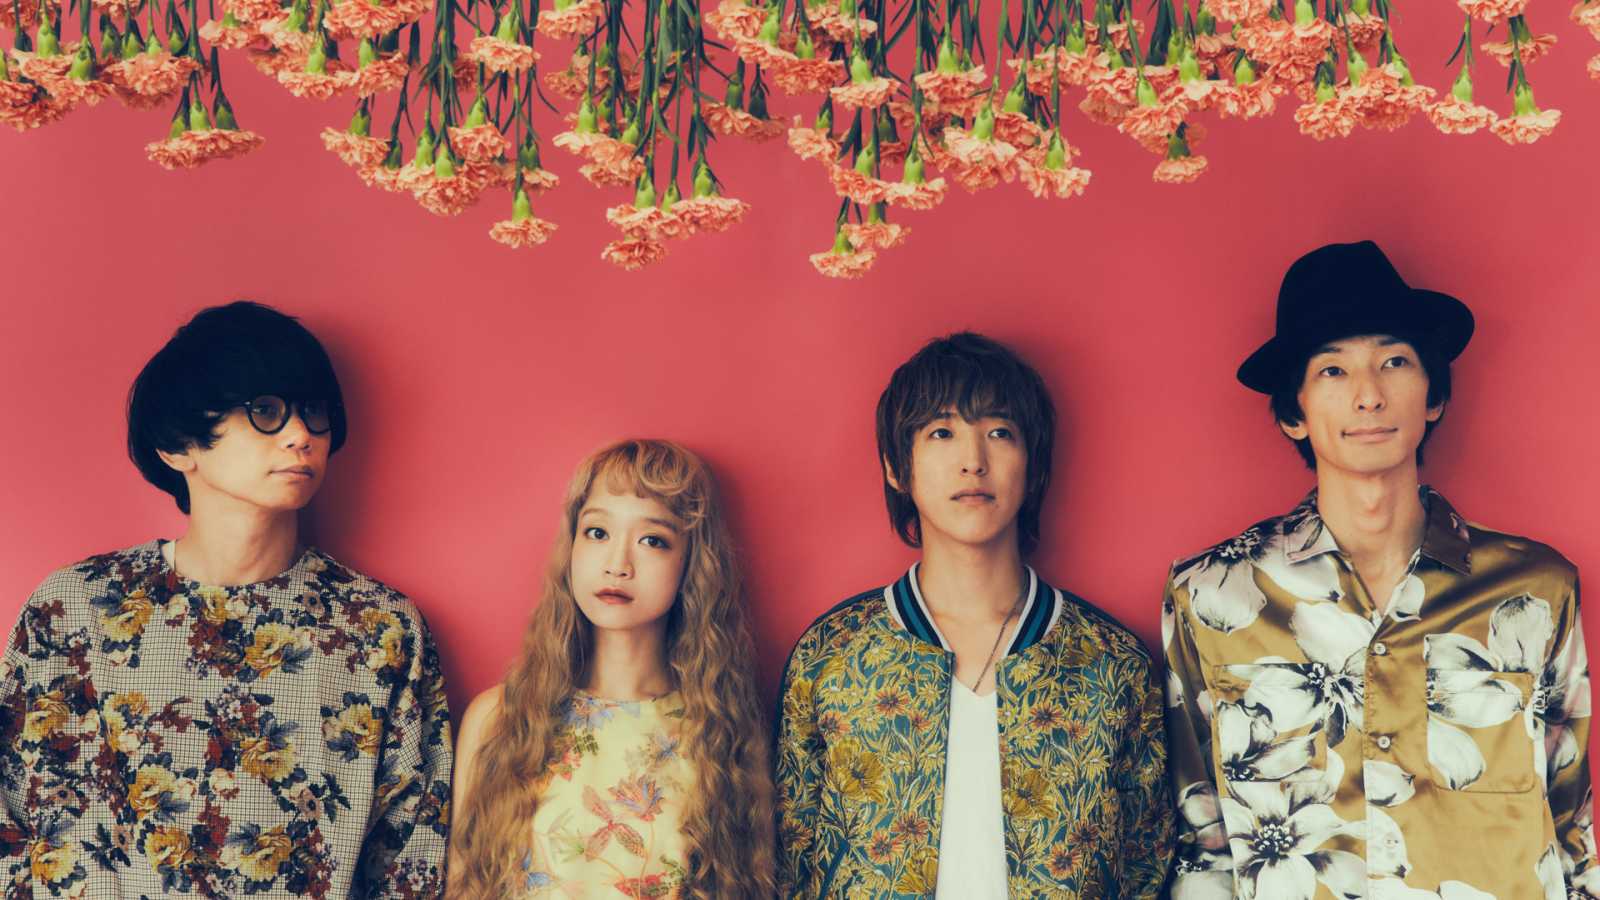 Czecho No Republic Celebrates 10th Anniversary with Three Consecutive Digital Singles © Czecho No Republic. All rights reserved.